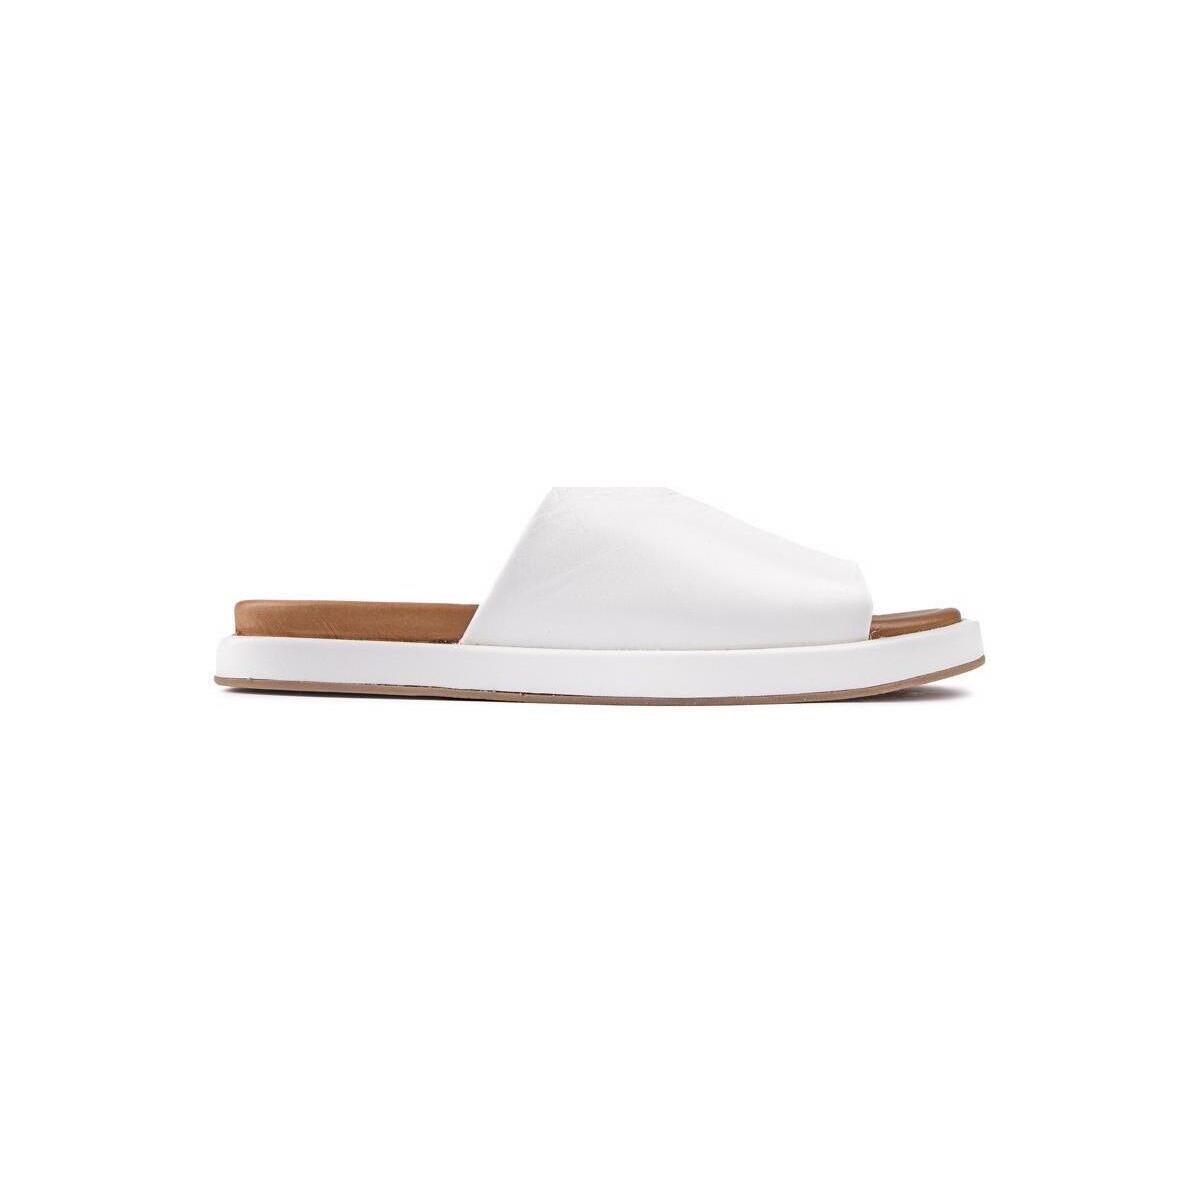 Chaussures Femme Claquettes Sole Nya Slide Diapositives Blanc